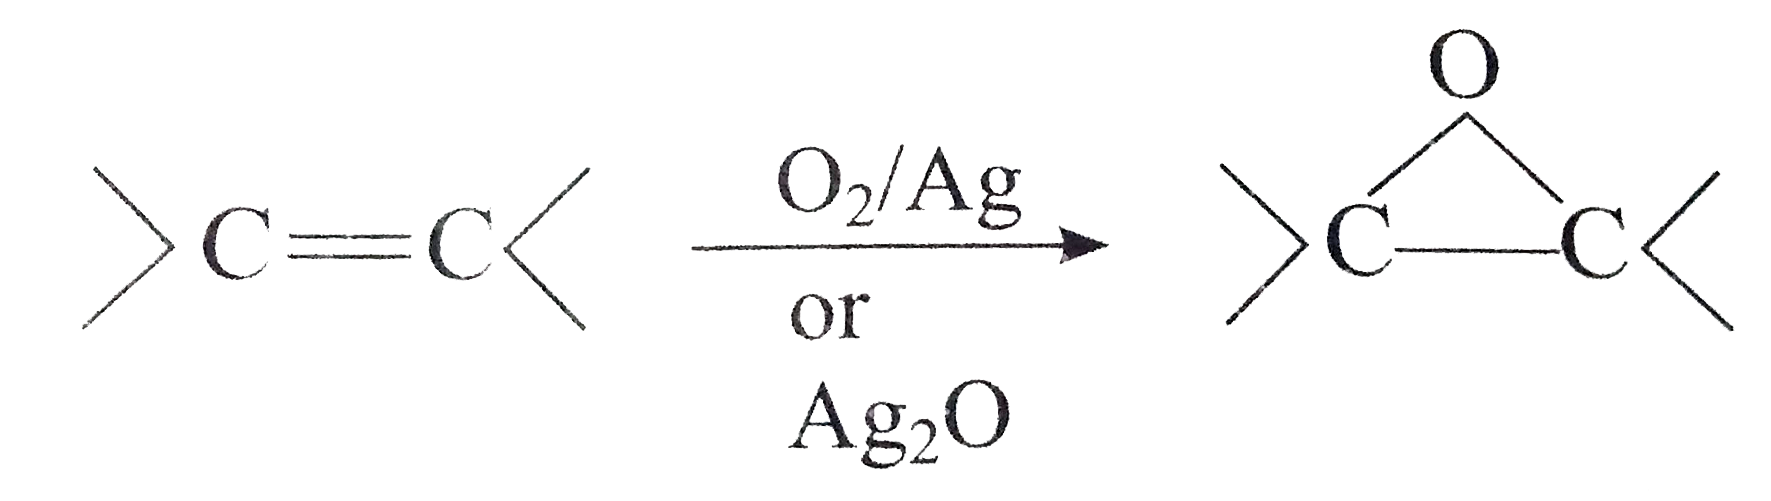 Oxidation without clevage of sigma bond takes place in alkenes.      Presence of unsaturation in alkenes is detected by using Baeyer's reagent. Alkenes decolourise pink colour of Baeyer's reagent. In presence of Baeyer's reagent, 'syn' addition of -OH groups takes place on both carbons of double bond. The net reaction can be given as,   R-CH=CH-R overset(KMnO(4))underset(OH^(-))to R-overset(OH)overset(|)(CH)-overset(OH)overset(|)(CH)-R   Ozonolysis of alkenes gives ozonide, which on further hydrolysis gives aldehyde and/ or ketone.      Product of ozonolysis gives information about: